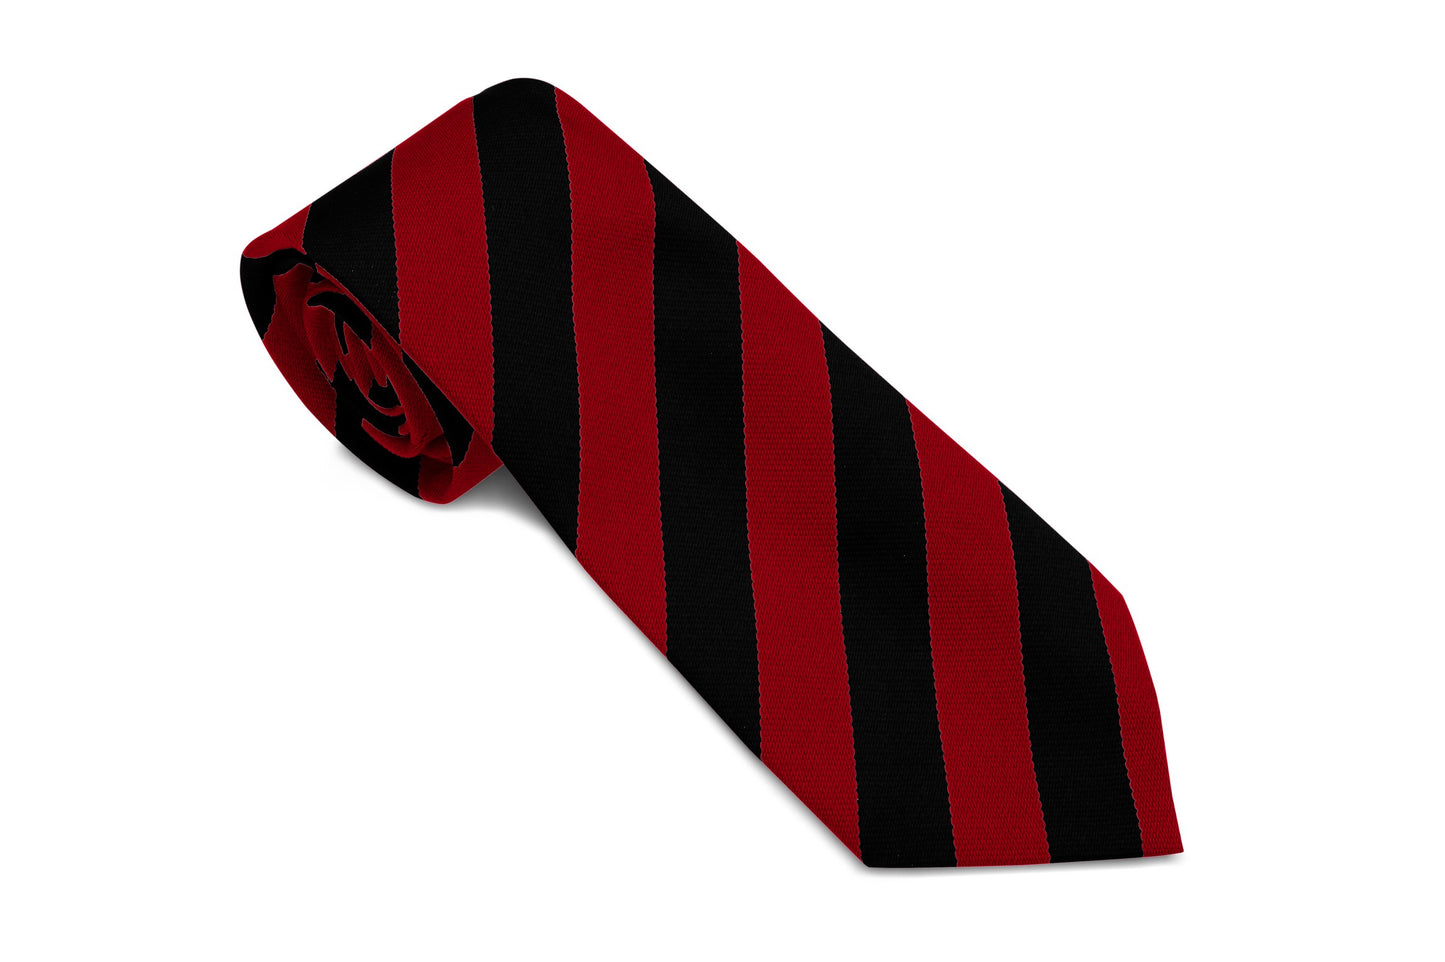 Stock Design Ties in Black and Red Equal Stripe (5404-9506) - Lynendo Trade Store